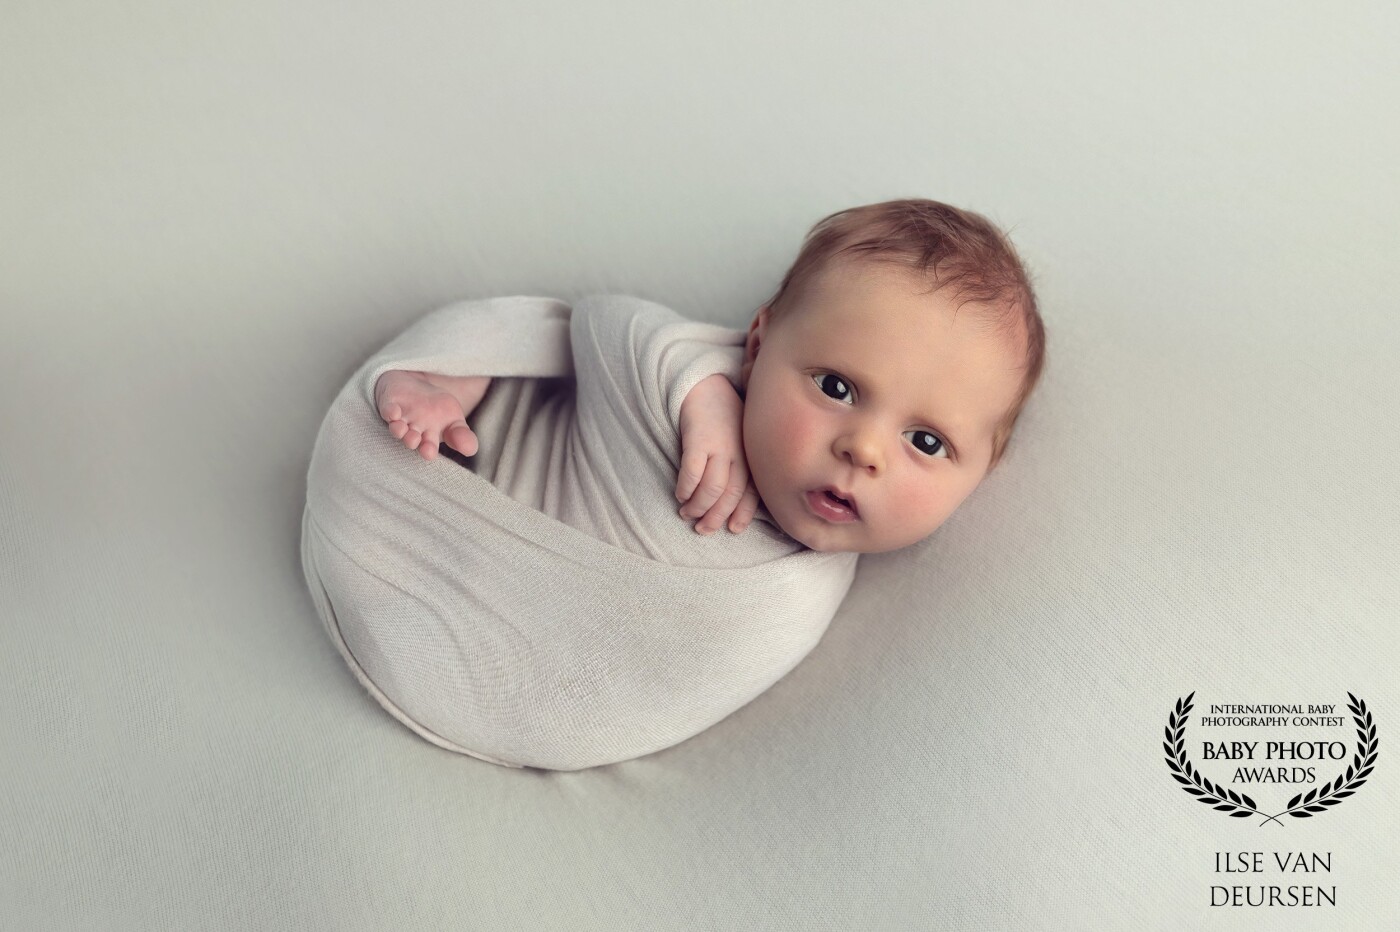 Due to Covid, this boy came into my studio at the age of 6 weeks. Sleeping during the session? No way! :)<br />
But he was so cute, even when he was looking at me with these wandering eyes.